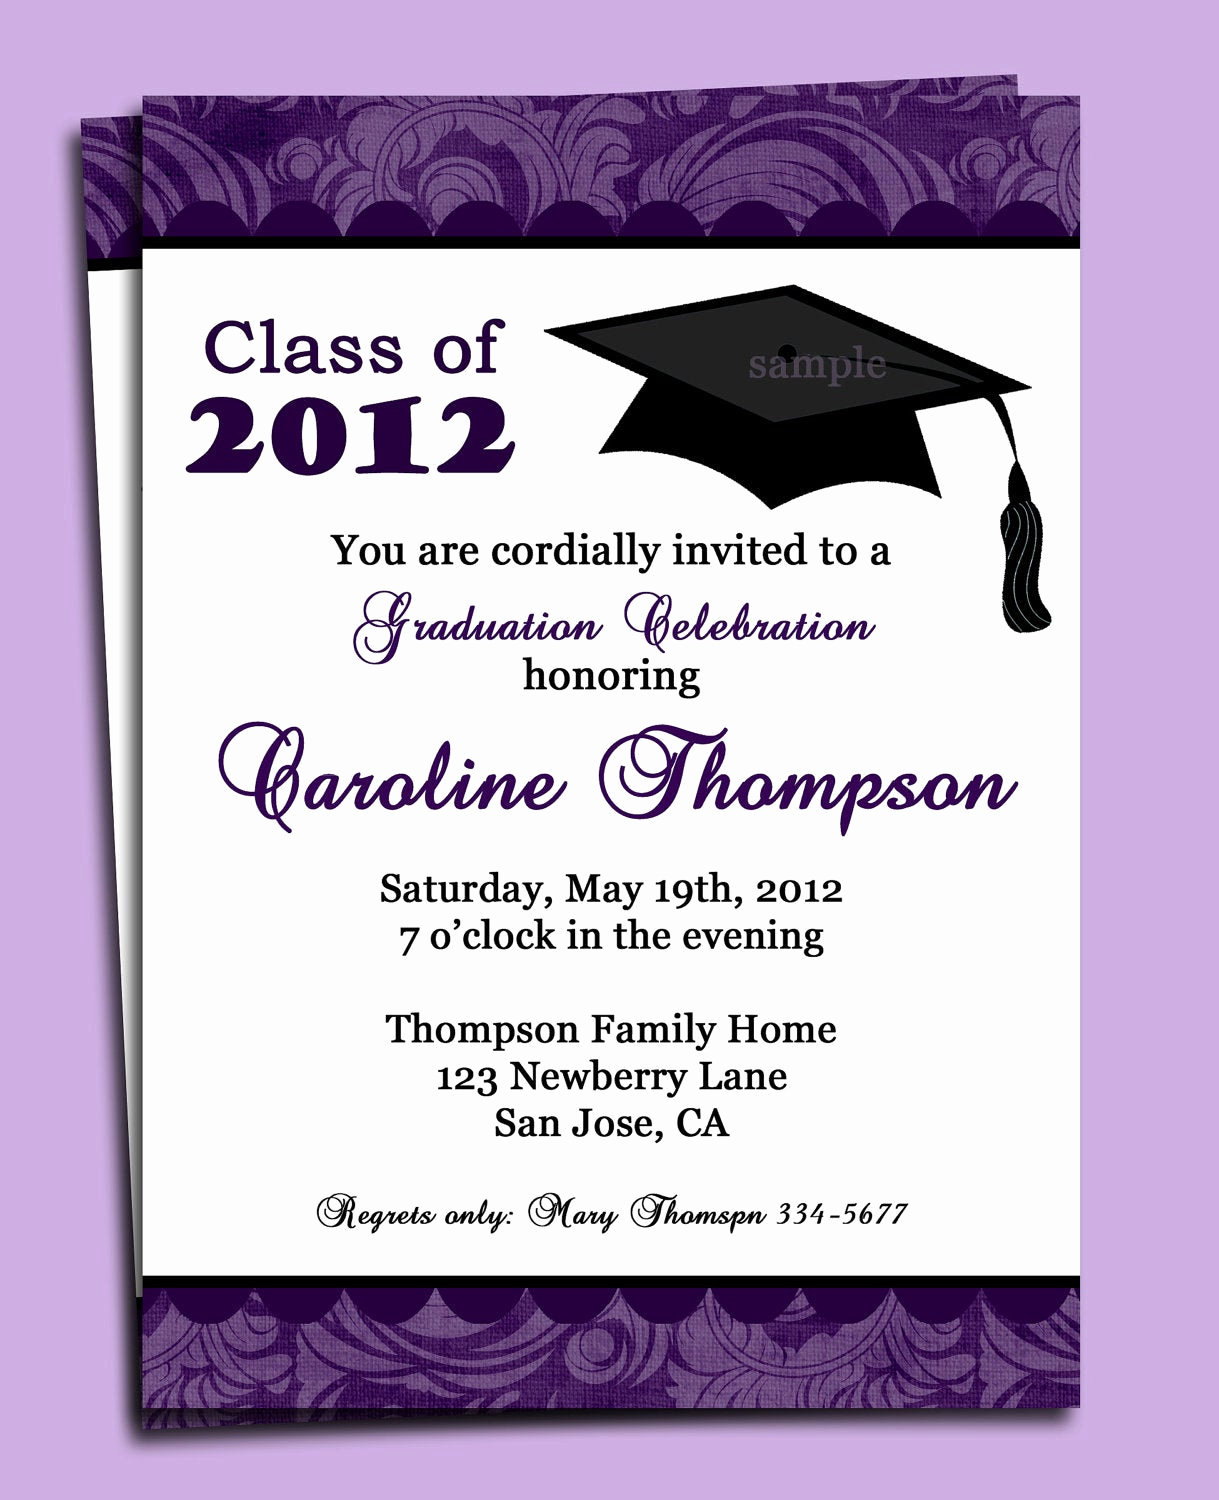 Graduation Invitation Designs Free Awesome Graduation Party or Announcement Invitation Printable or